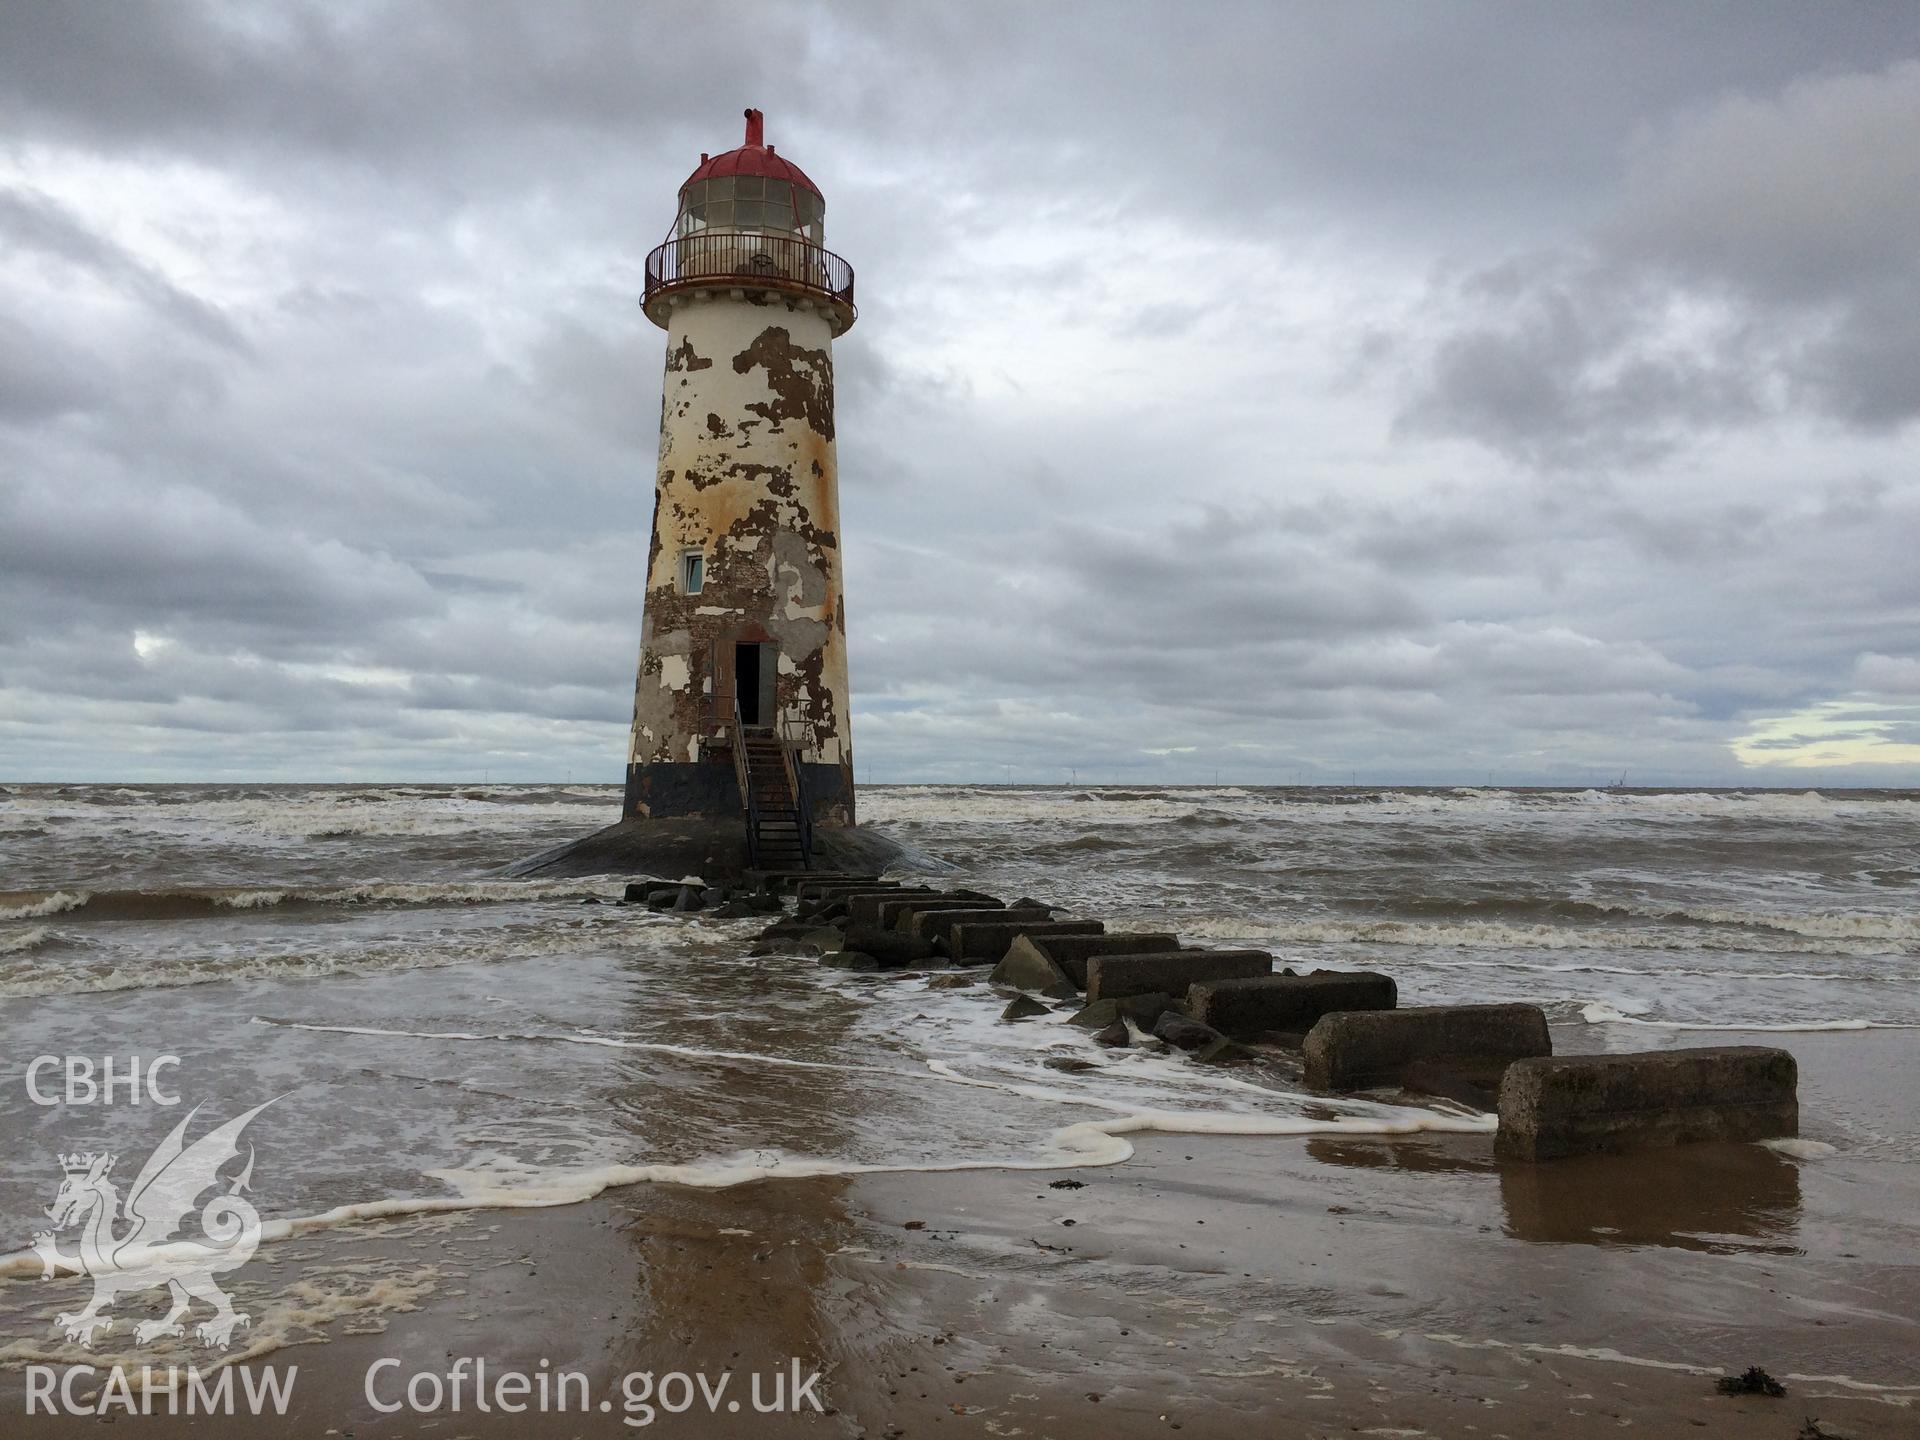 Colour photo showing Point of Ayr Lighthouse, taken by Paul R. Davis, 6th November 2016.